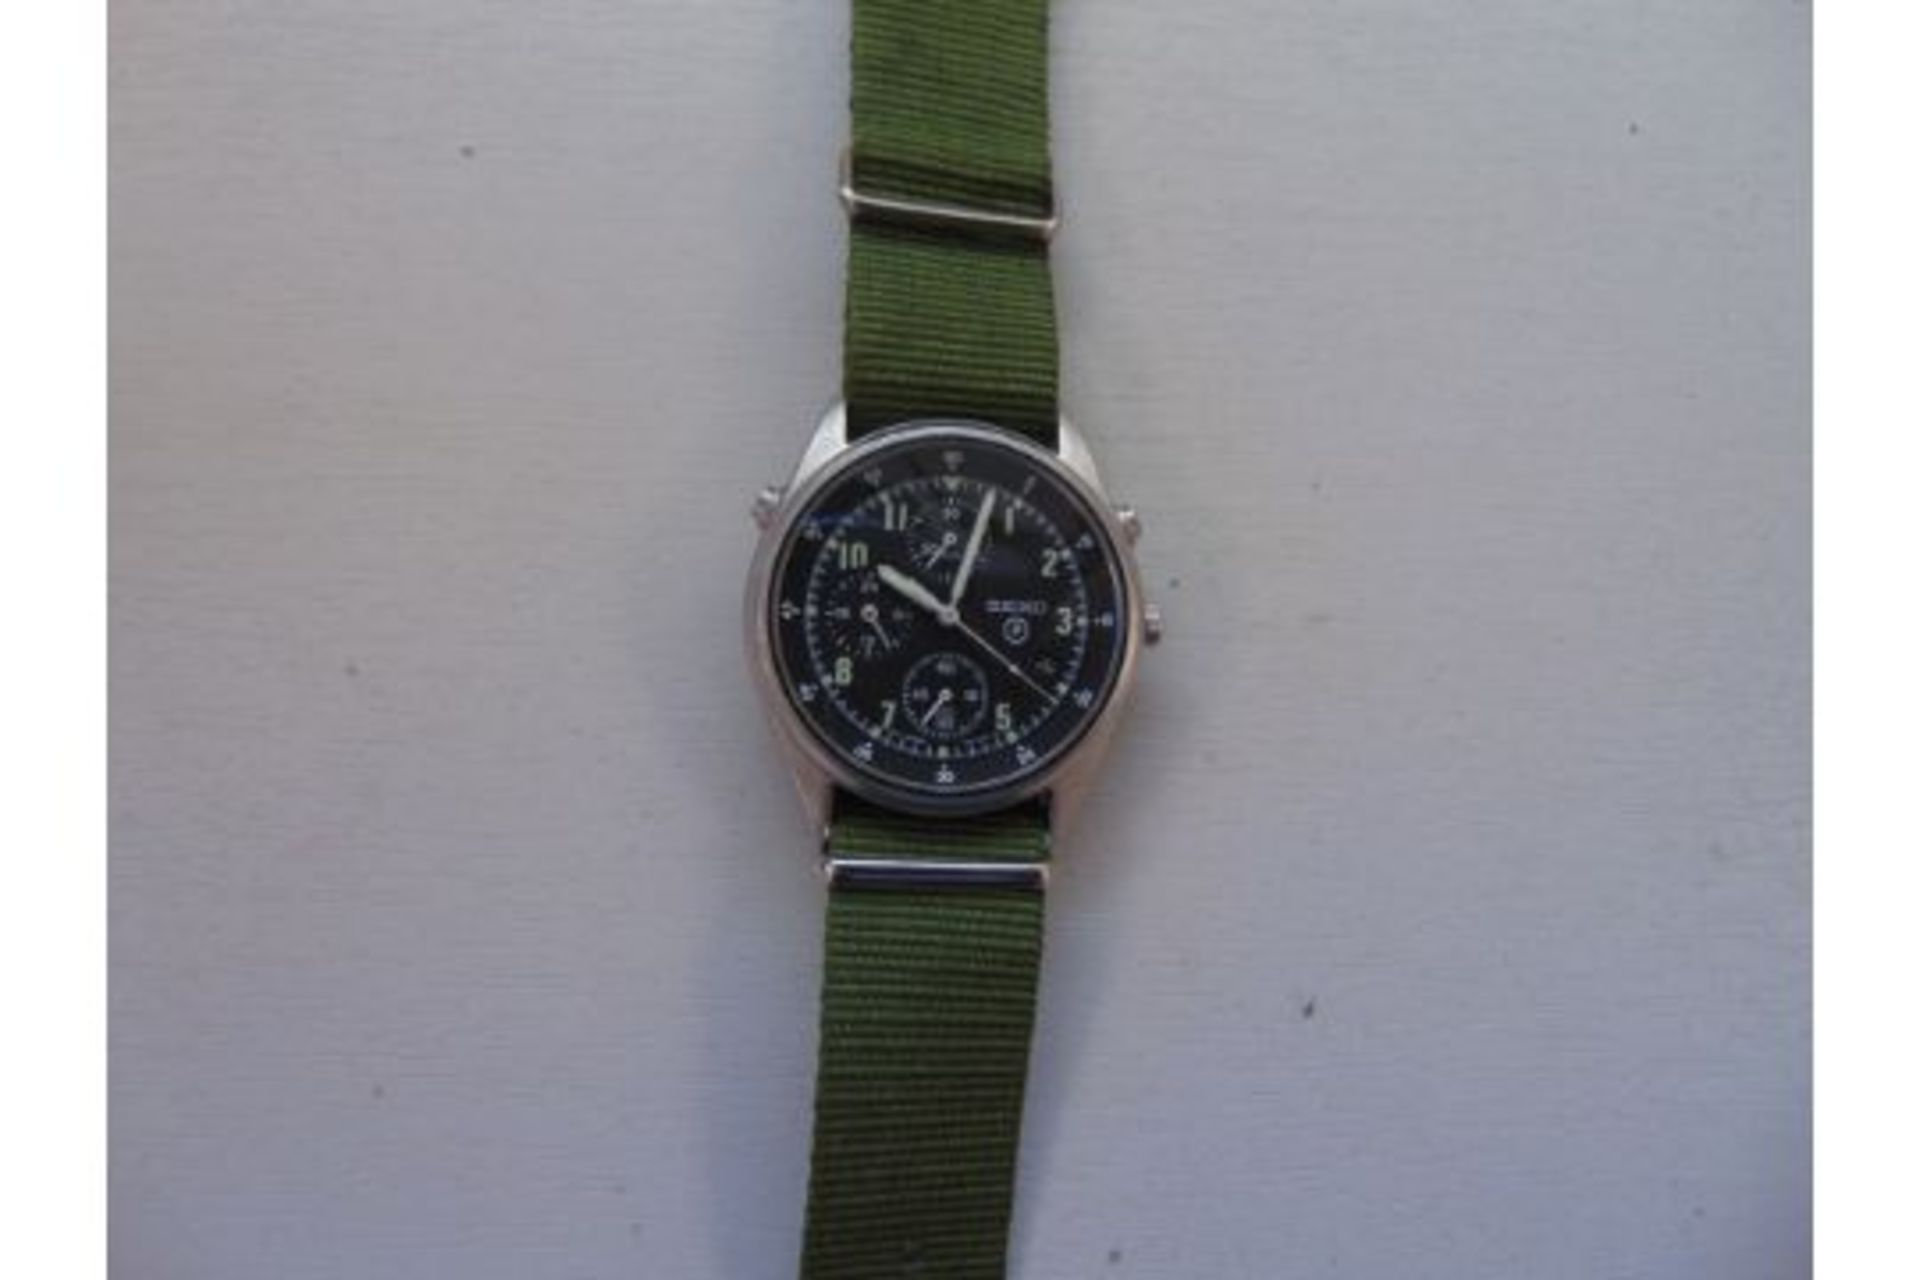 Seiko Gen 2 Pilots Chrono (Date adjust) RAF Tornado Force Issue, Nato Numbers, Date 1995, S/N 3092 - Image 2 of 5